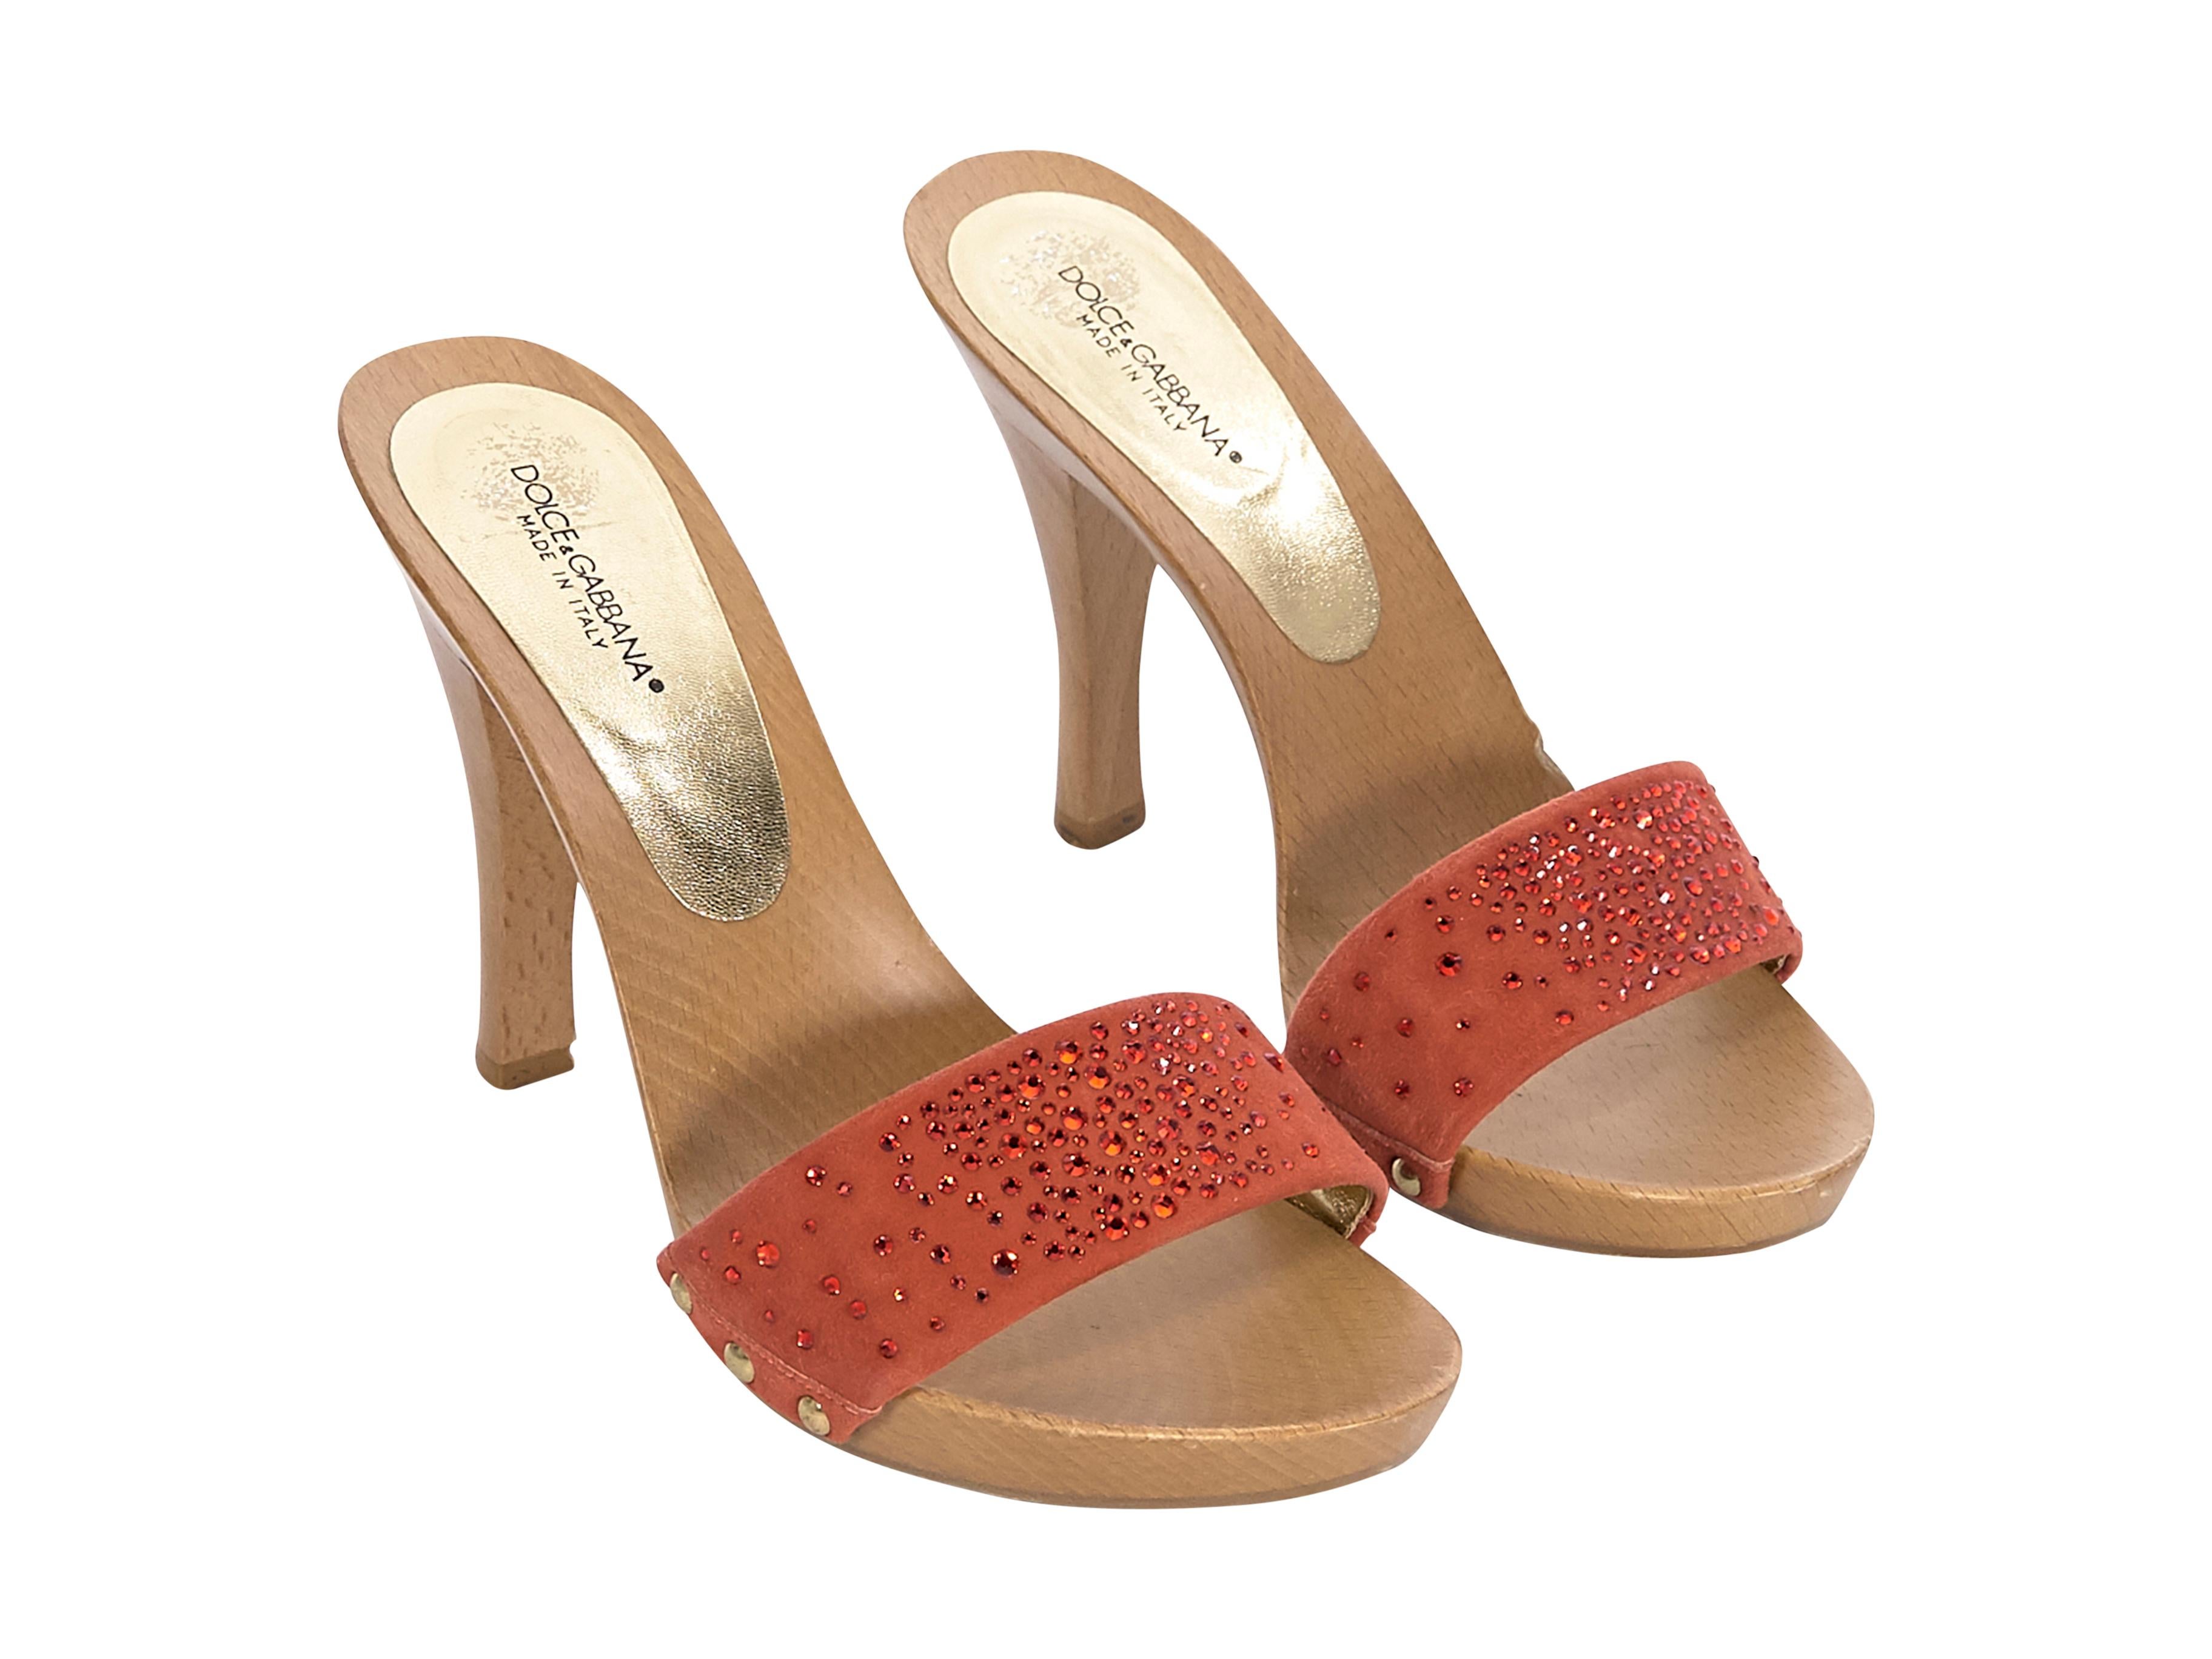 Product details:  Orange suede mule sandals by Dolce & Gabbana.  Embellished with crystals.  Open toe.  Slip-on style.  4